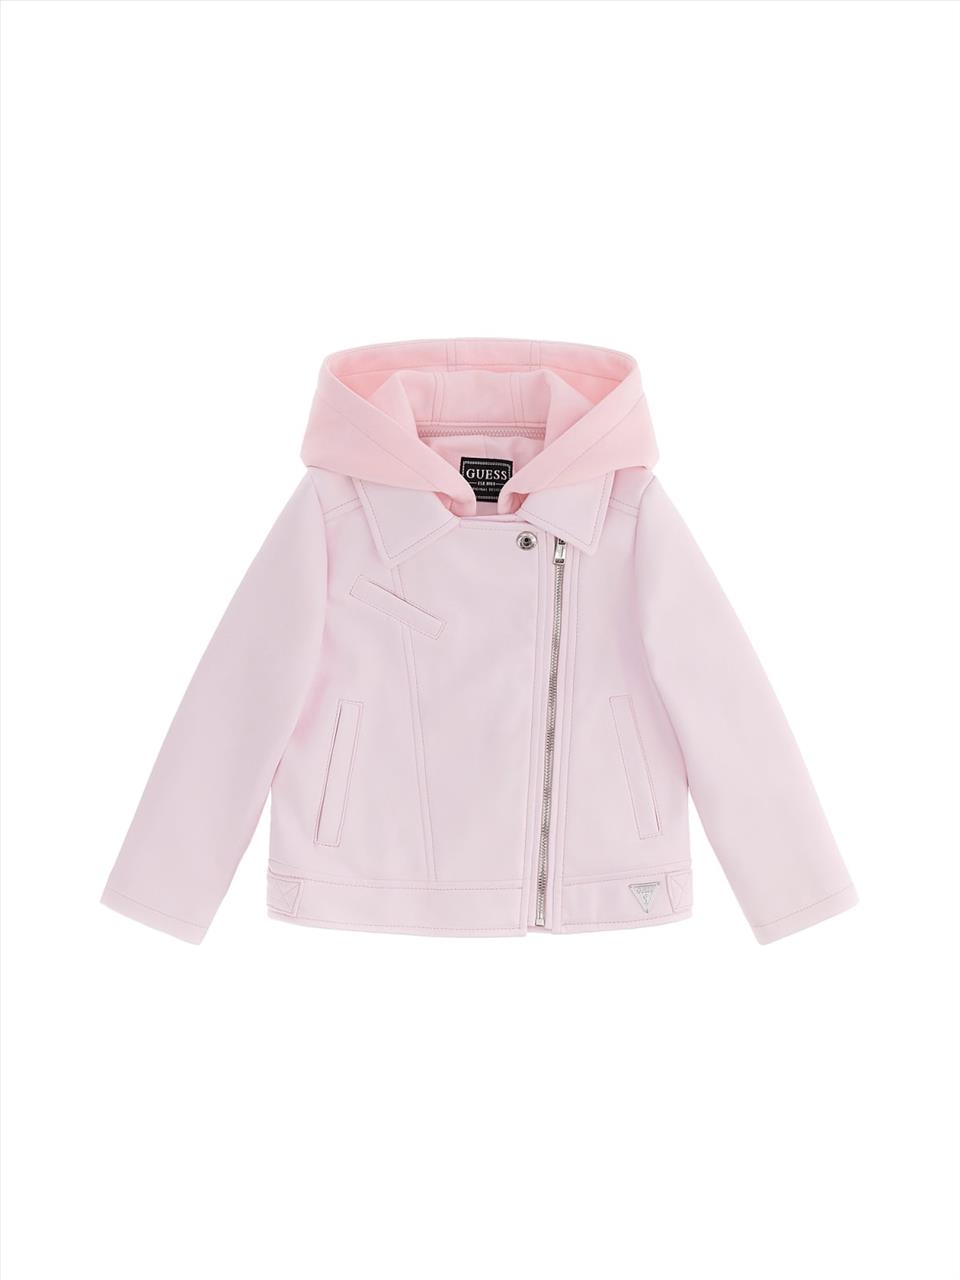 JACKET ECO LEATHER PINK GIRL GUESS S3-7